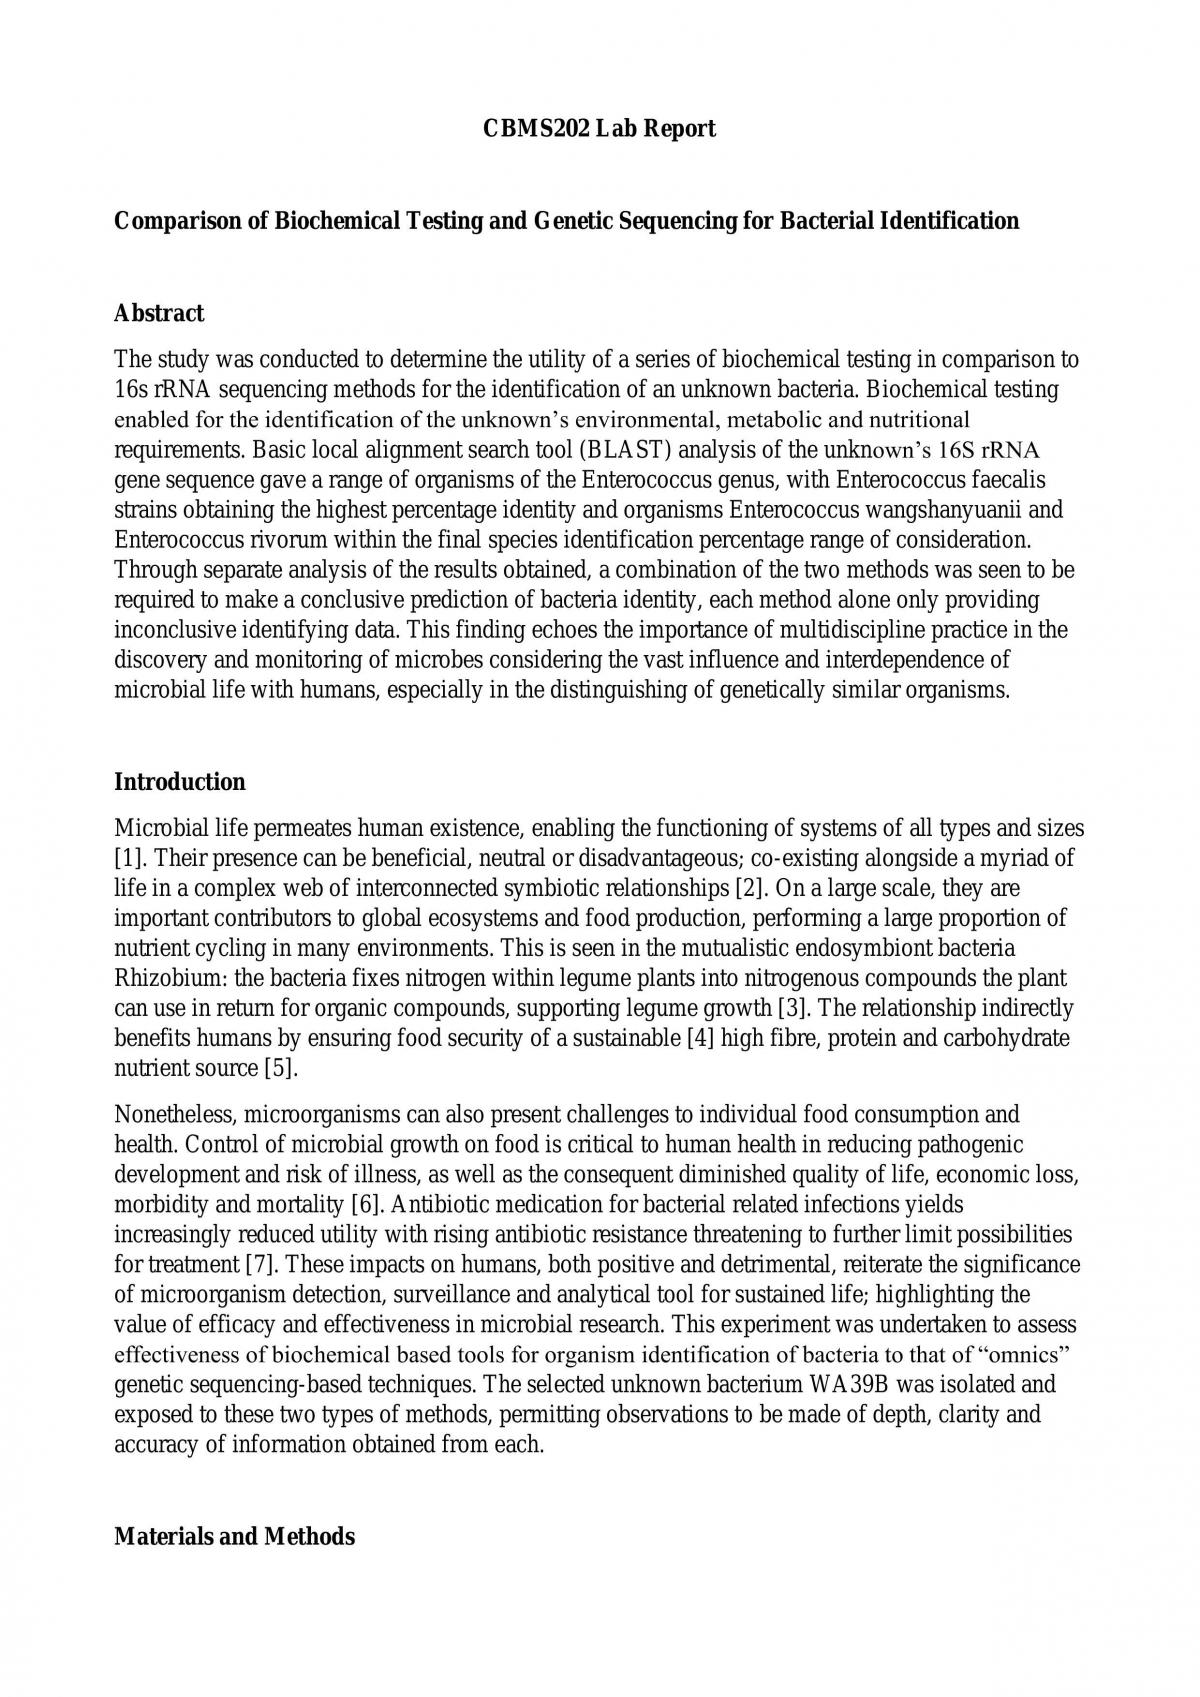 Comparison of Biochemical Testing and Genetic Sequencing for Bacterial Identification - Page 1